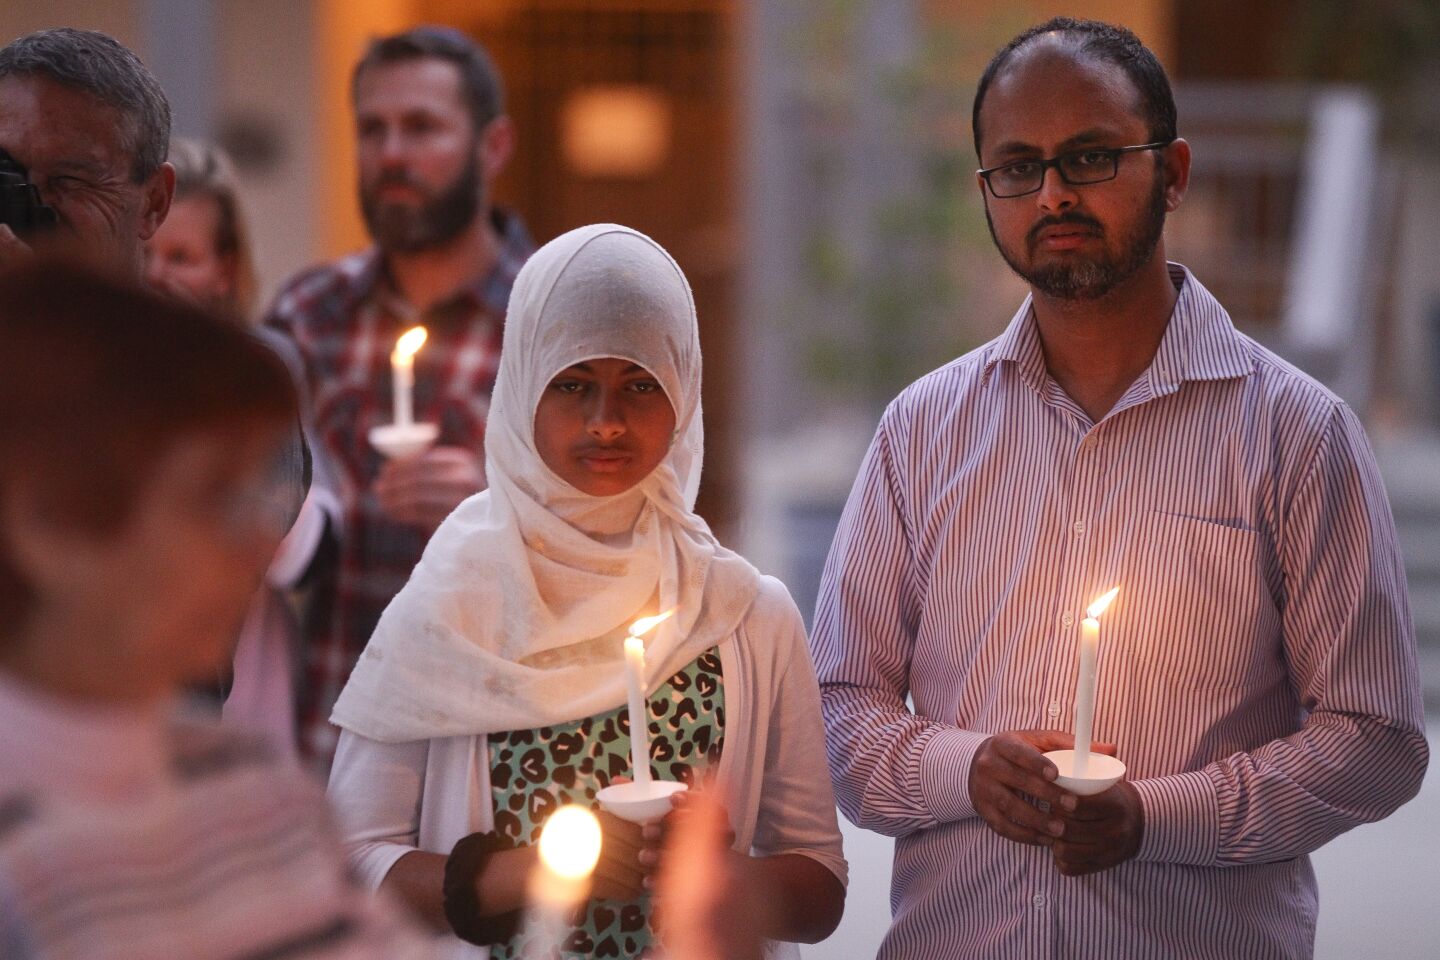 People from the community, many of them of various faiths, join members of the Rancho Bernardo Community Presbyterian Church in a candlelight vigil for the Chabad of Poway synagogue shooting victims.